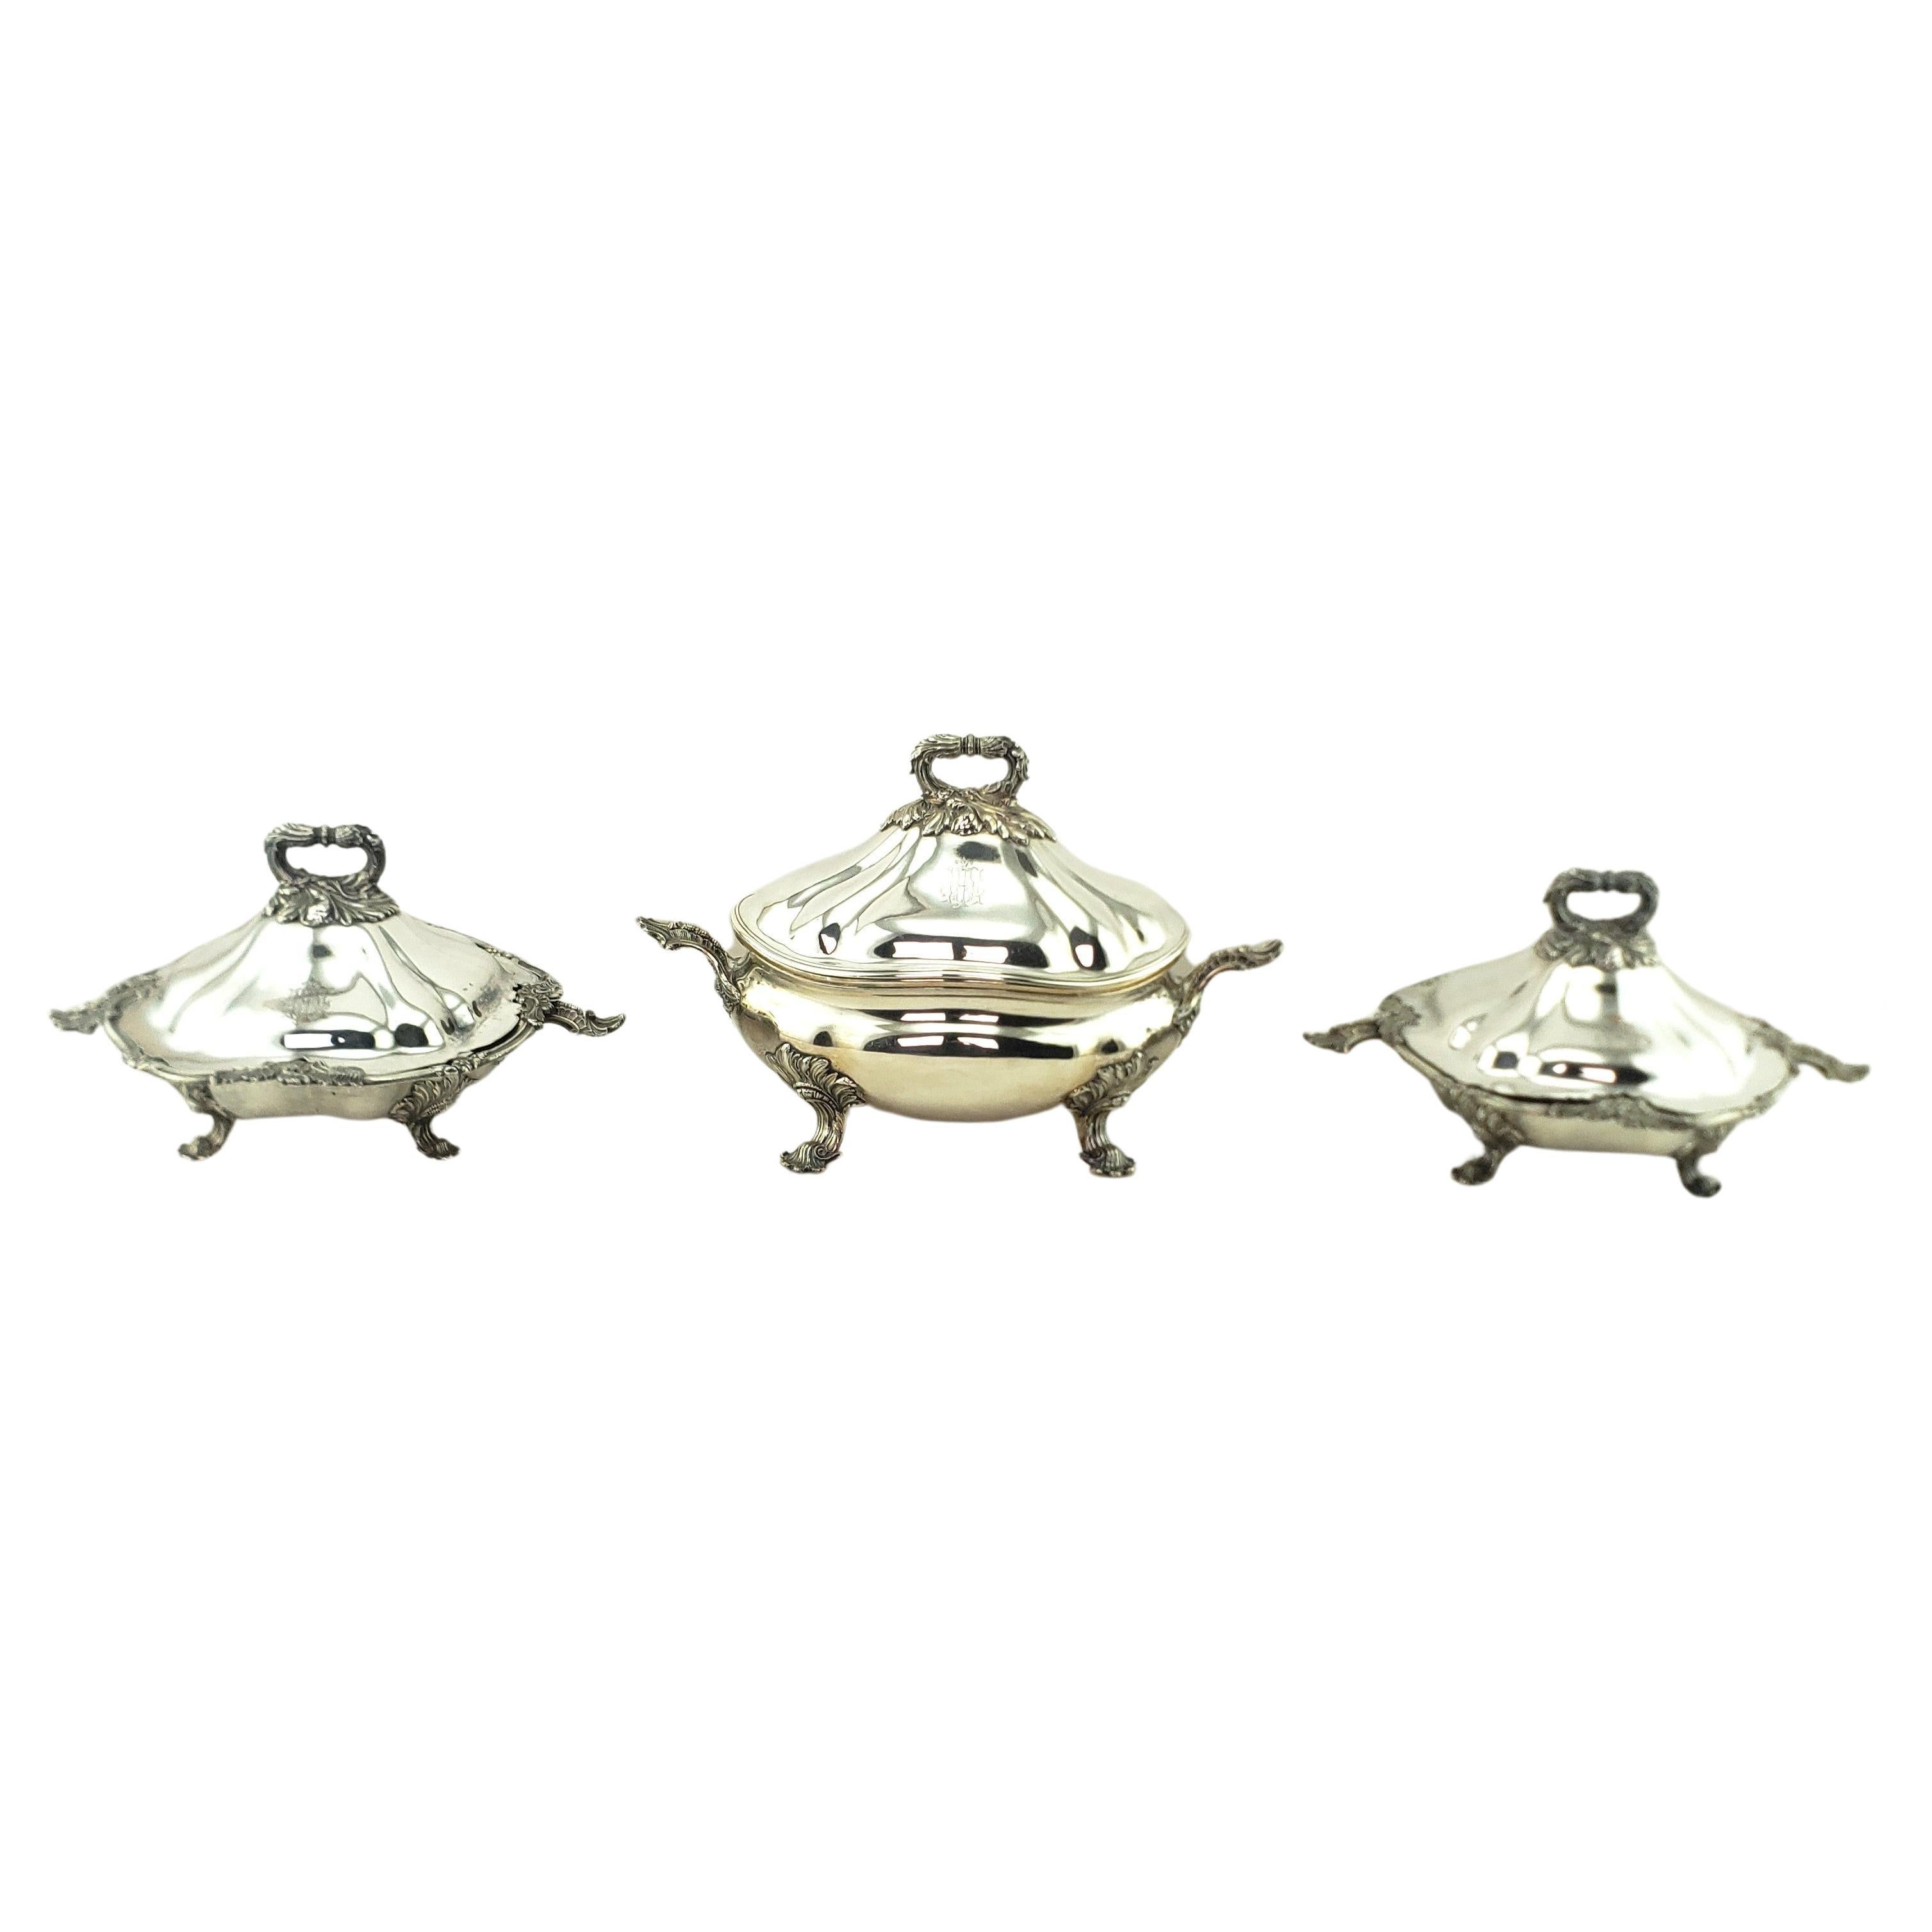 Three Antique Georgian Sheffield Plated Covered Tureens with Floral Decoration